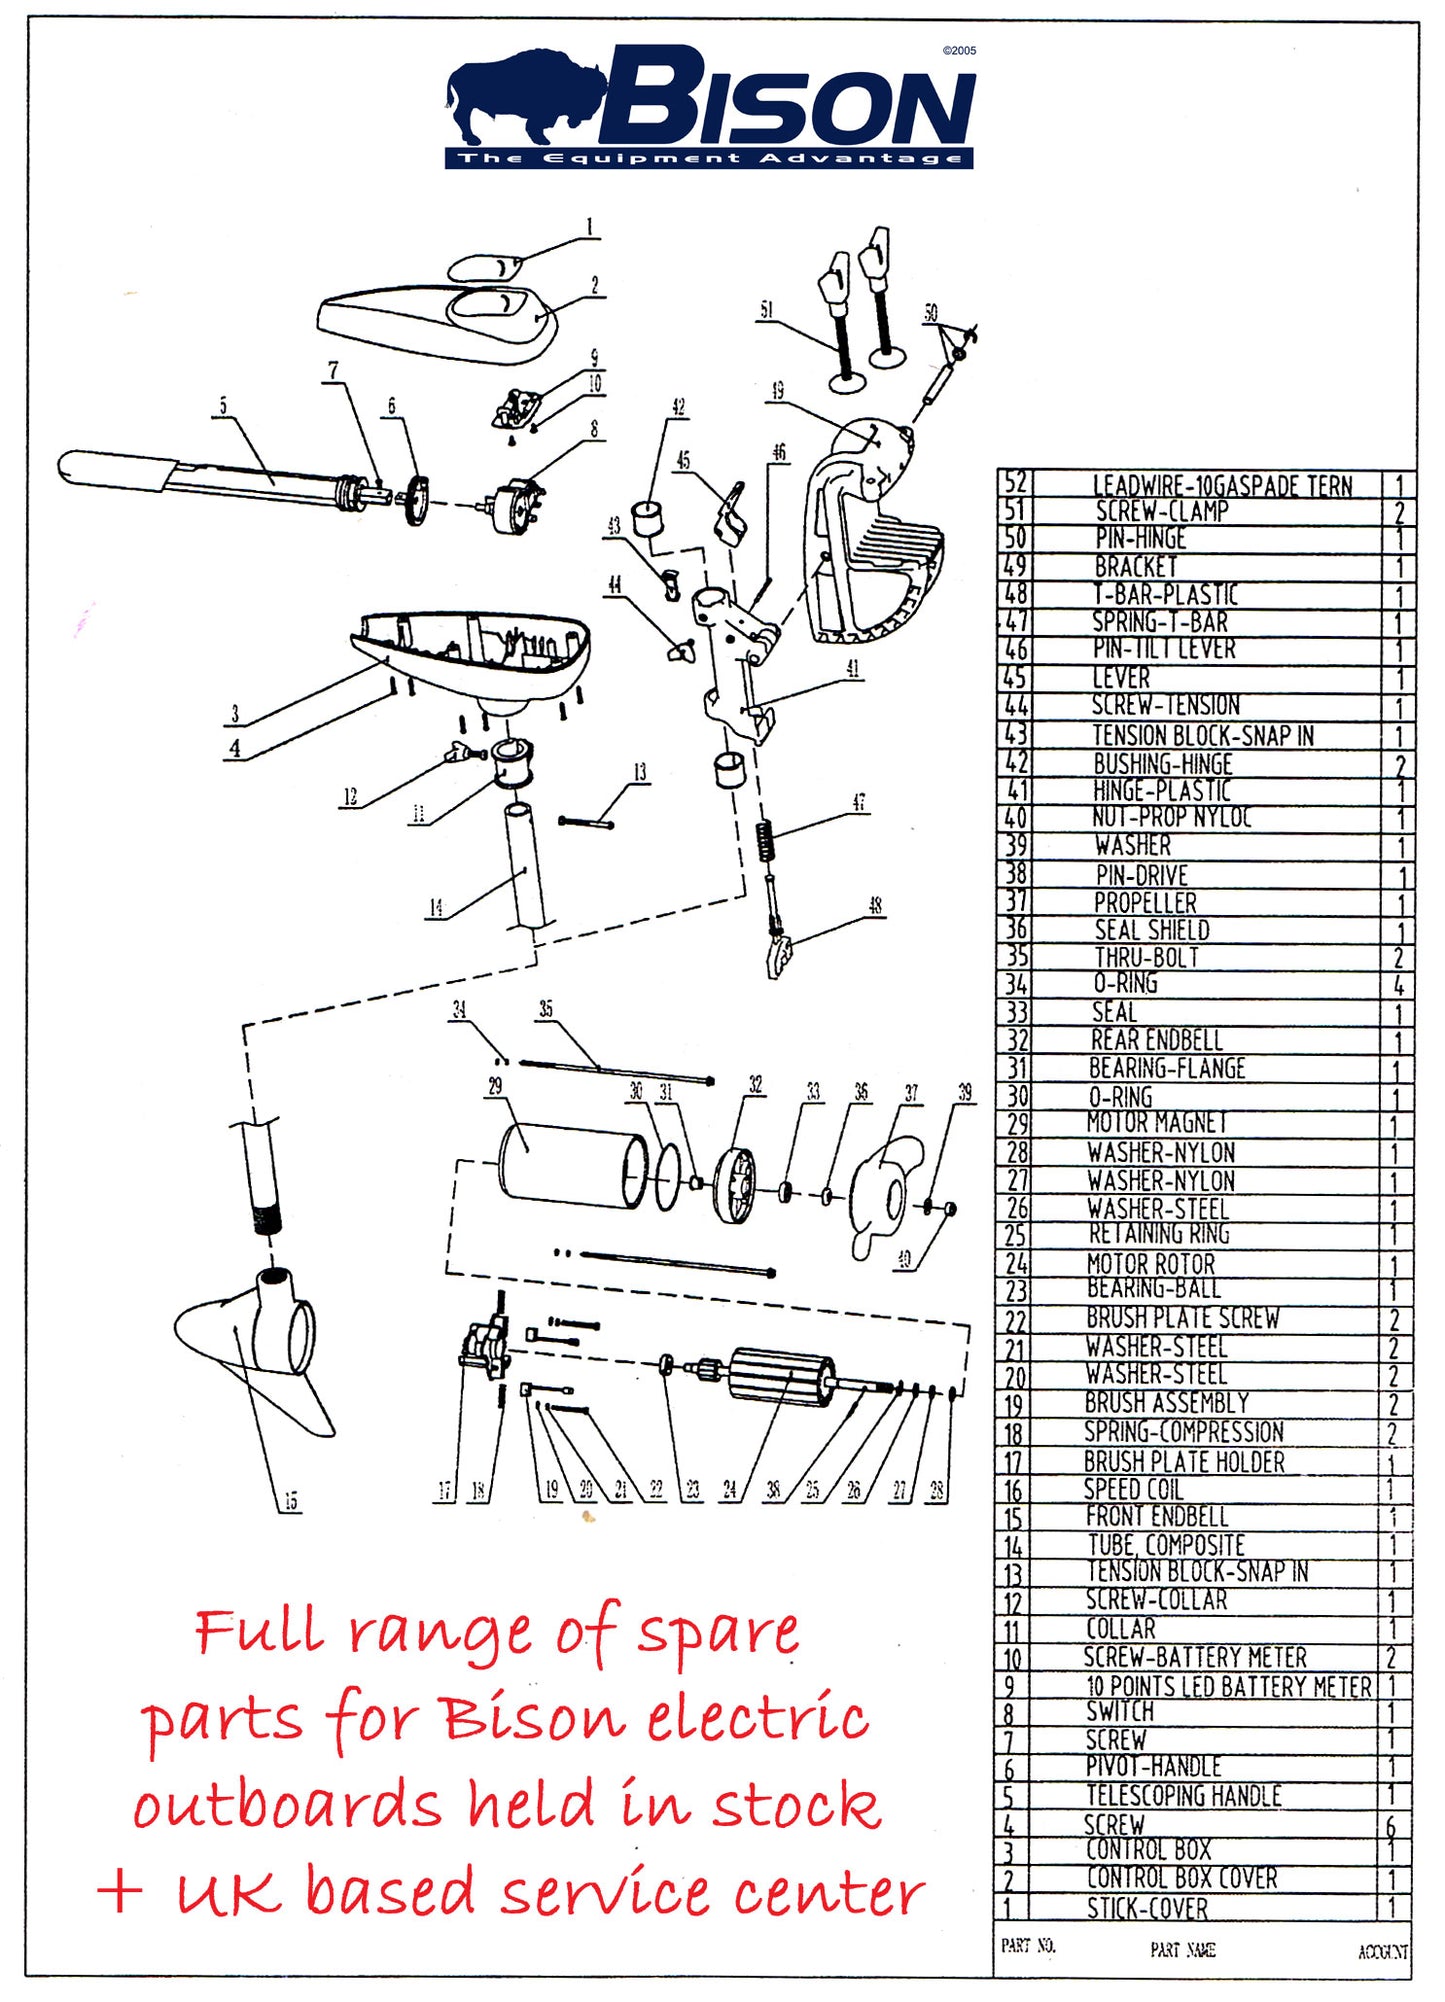 ELECTRIC OUTBOARD SPARE PARTS